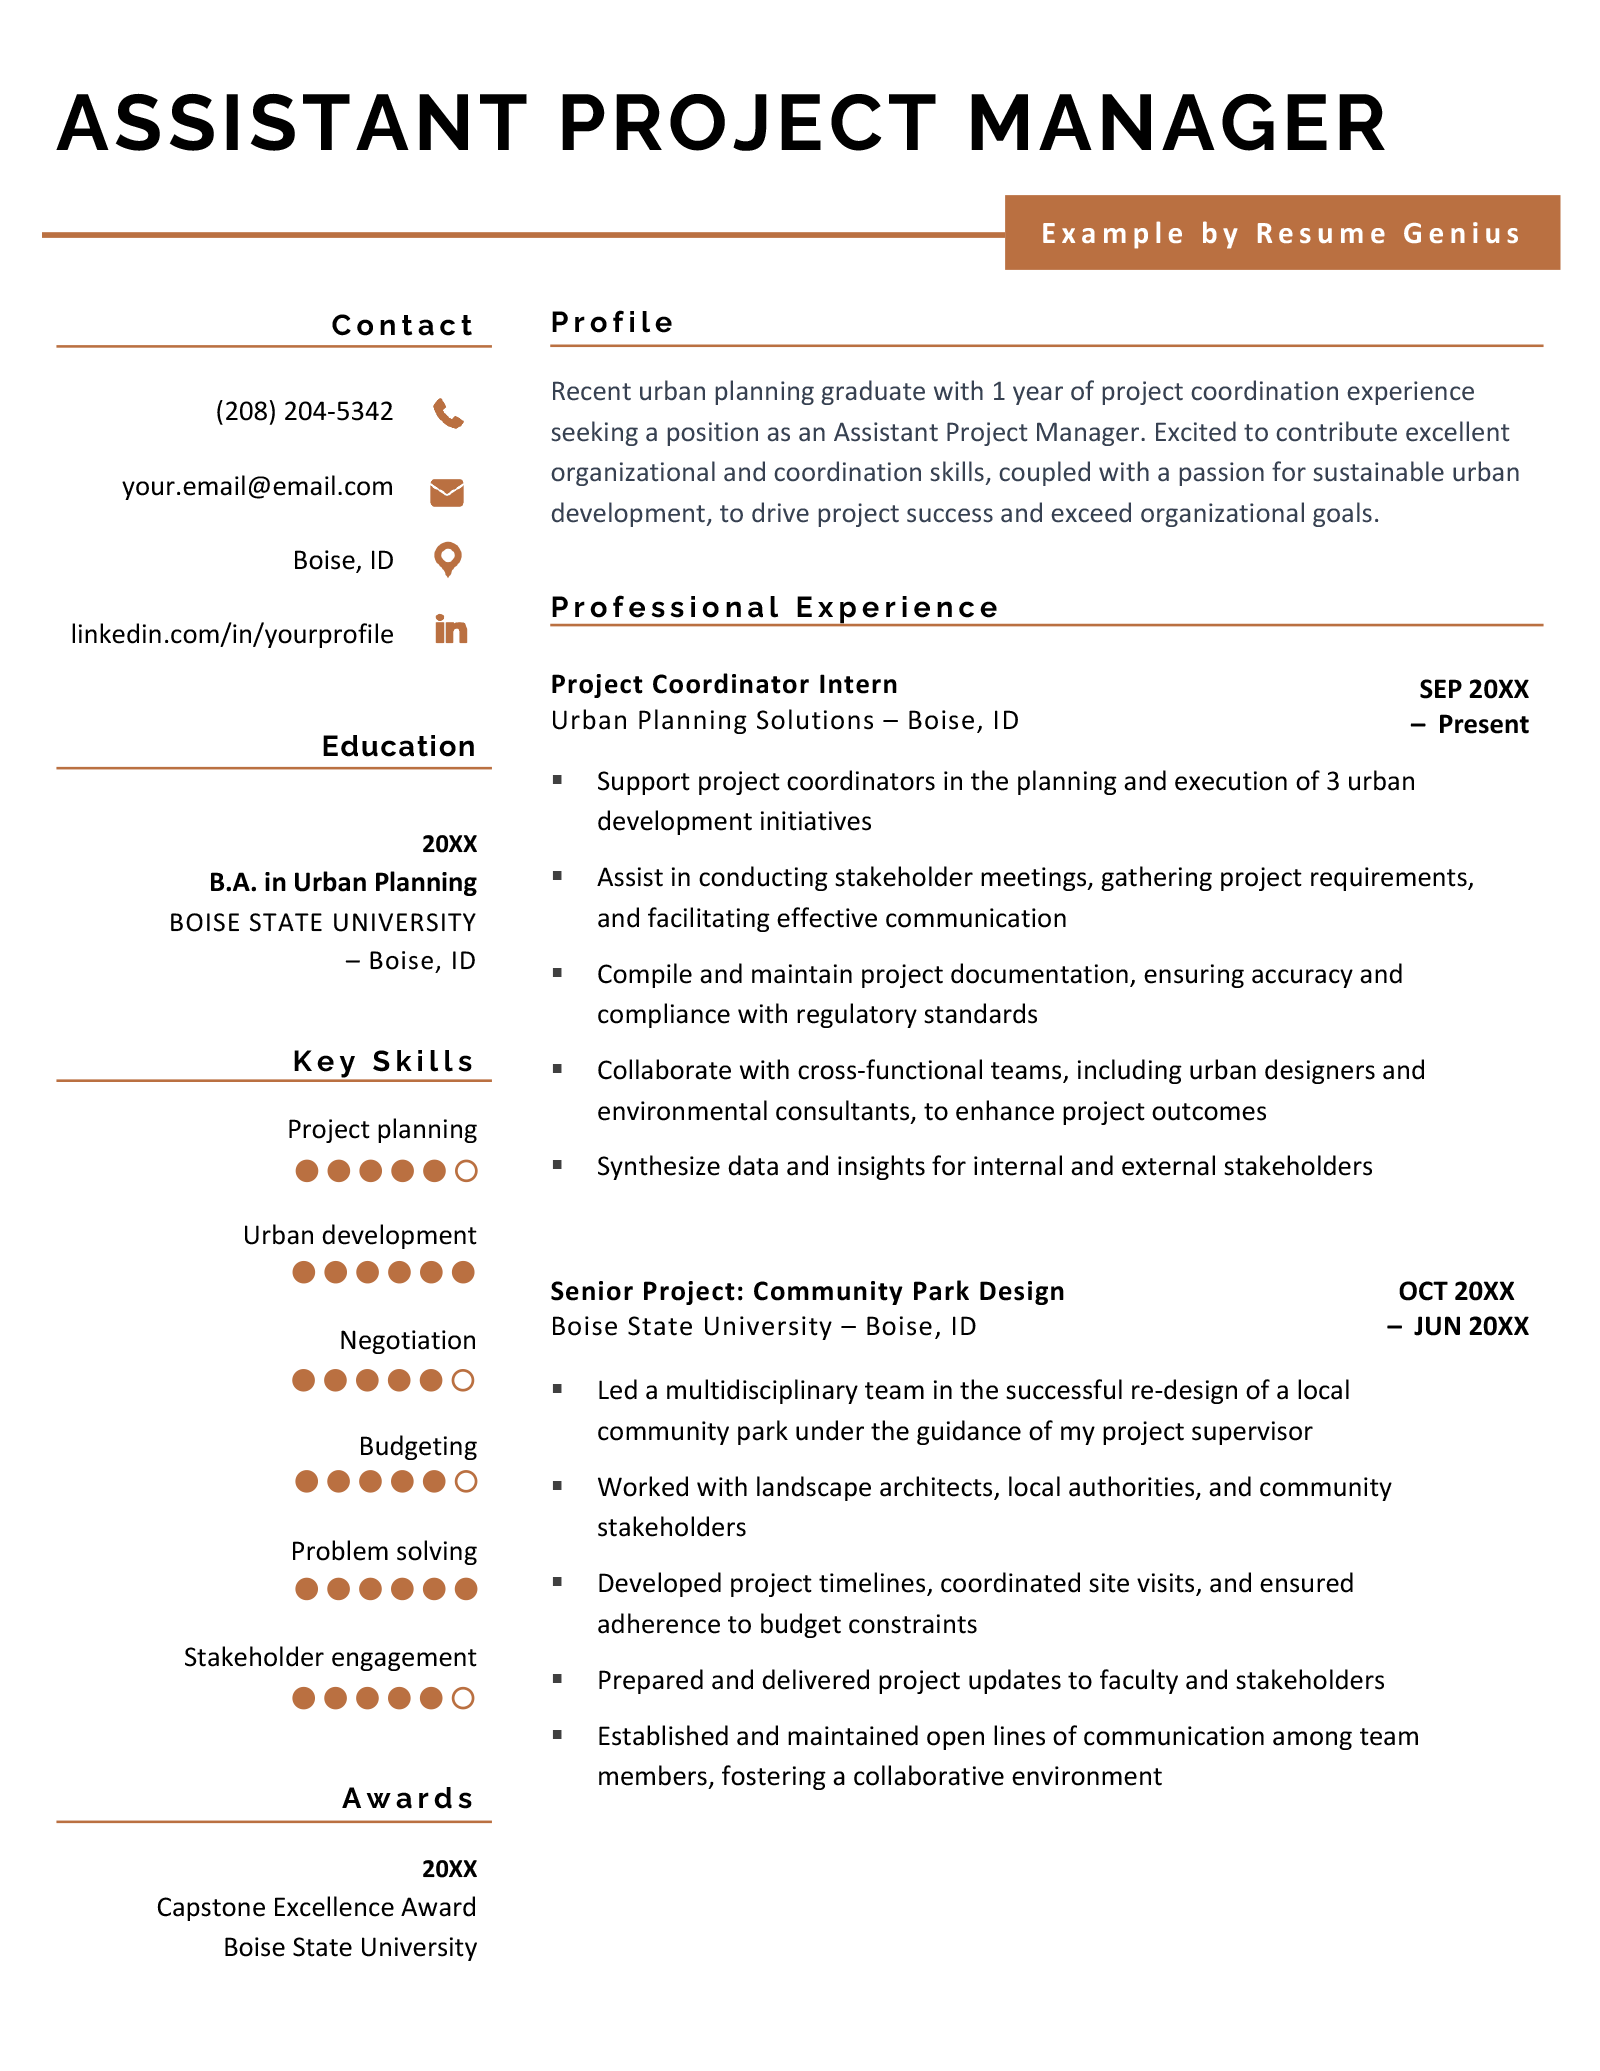 An assistant project manager resume example on a template with orange header and skill bars on the left side.